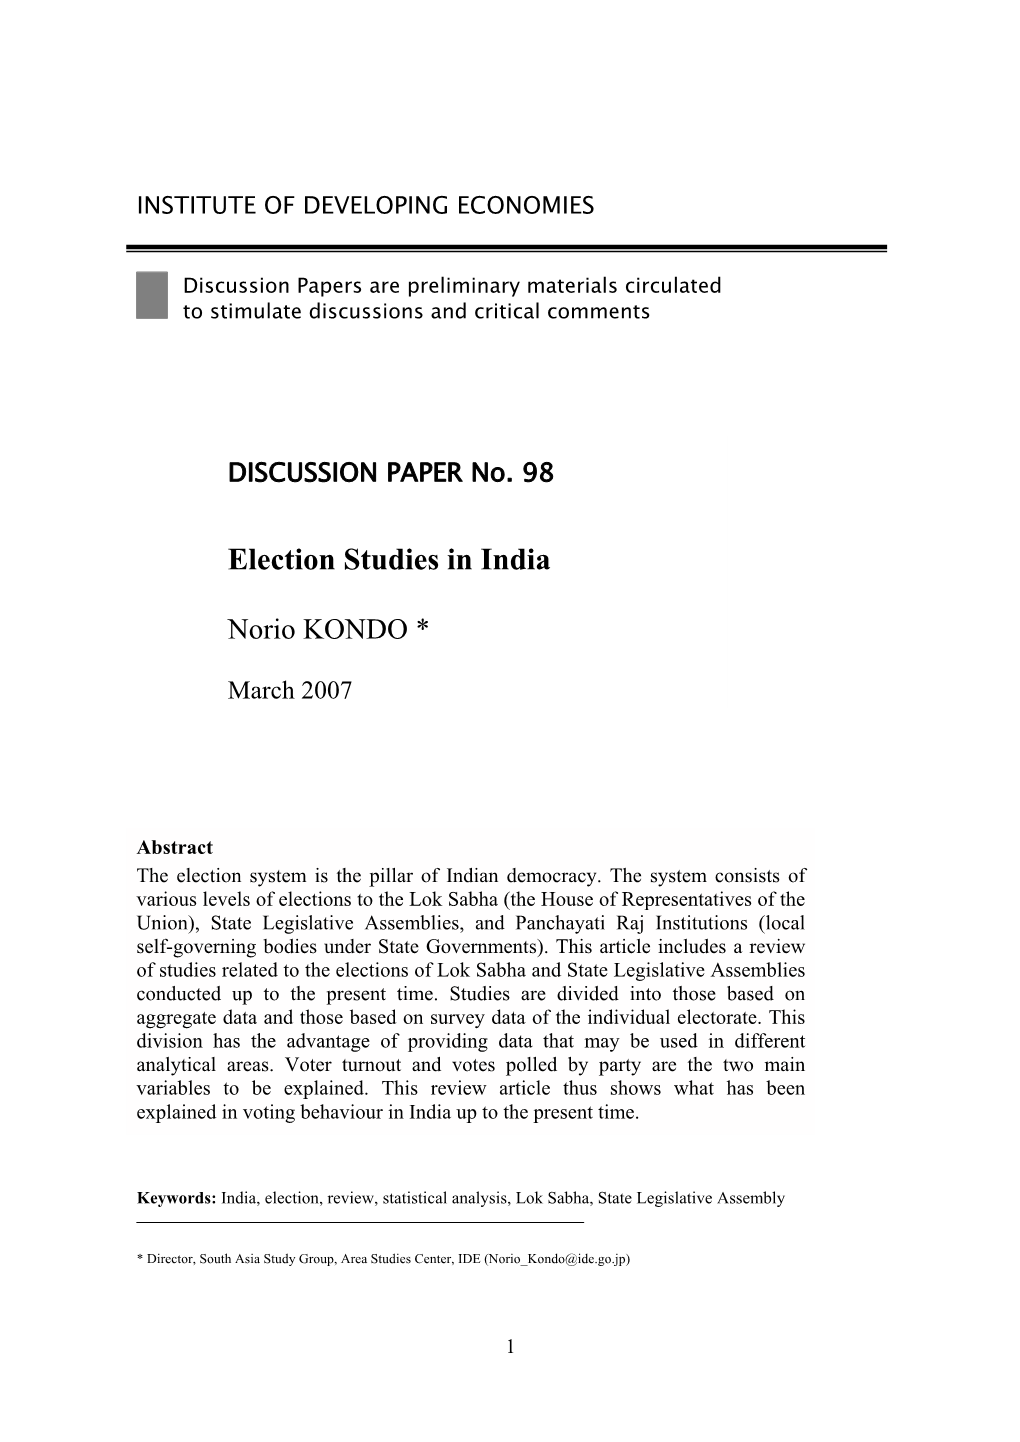 Election Studies in India (Discussion Papers No.098)